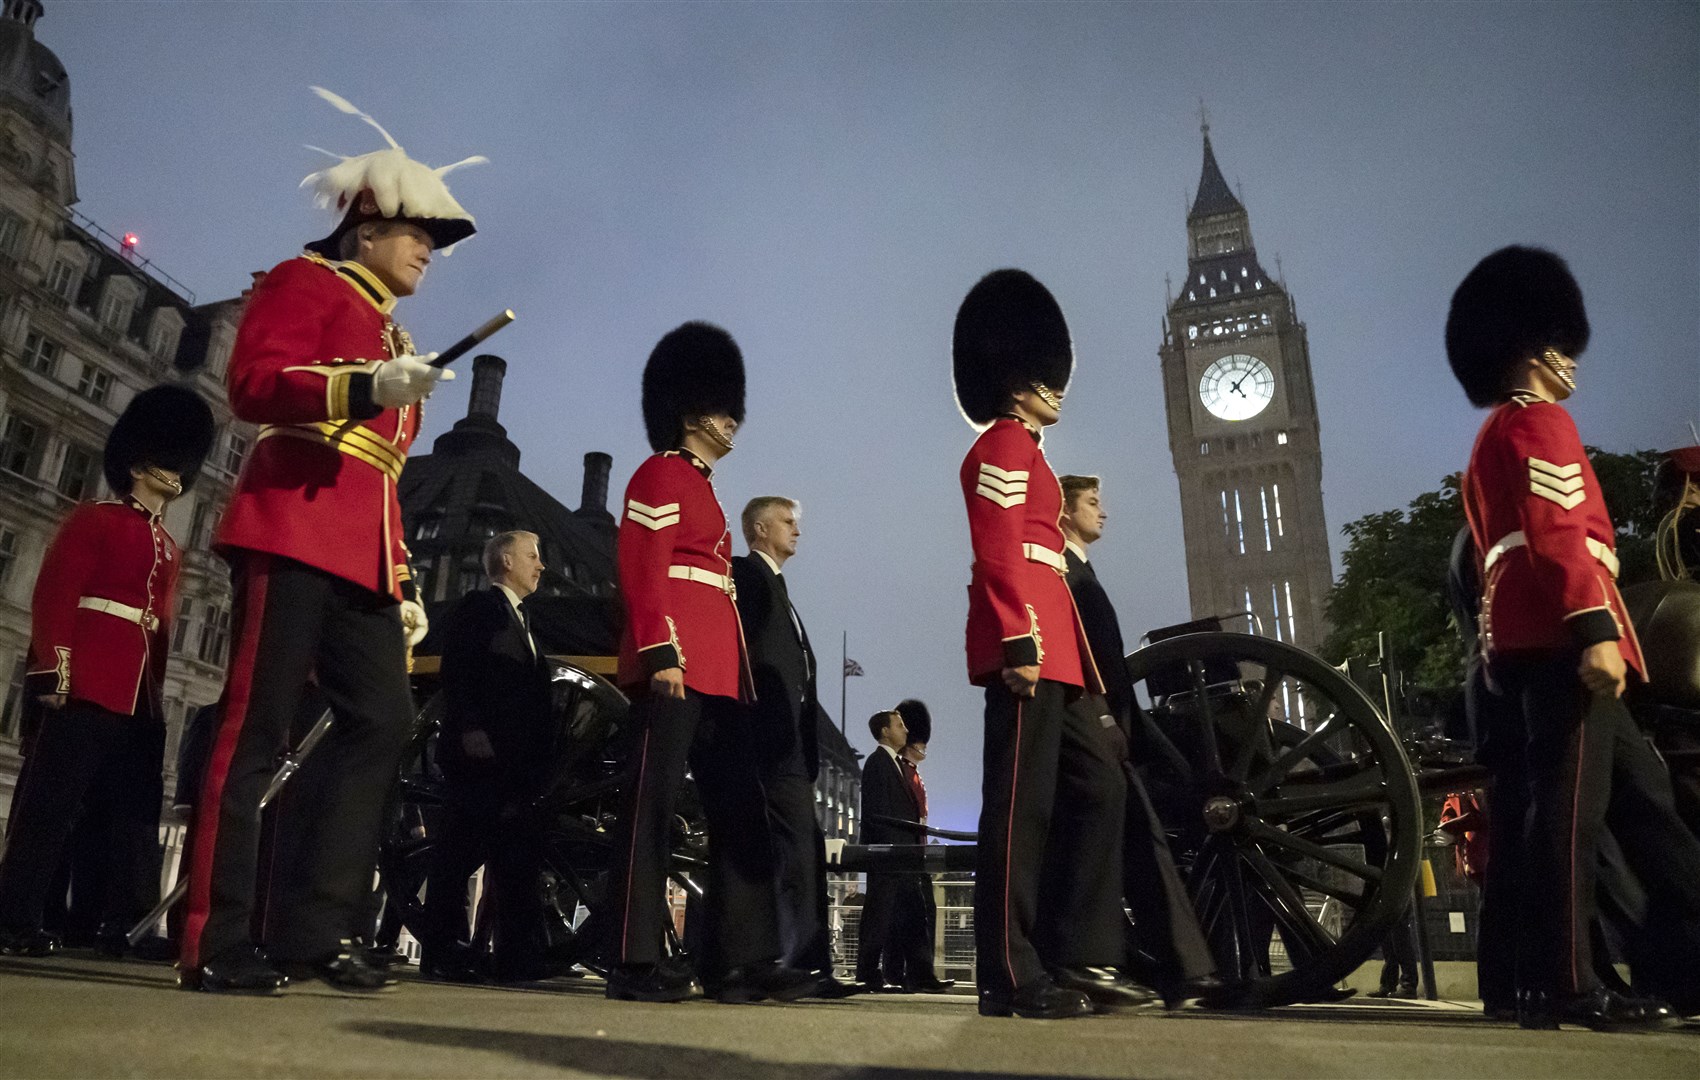 Rehearsals for the procession took place before dawn on Tuesday (Danny Lawson/PA)